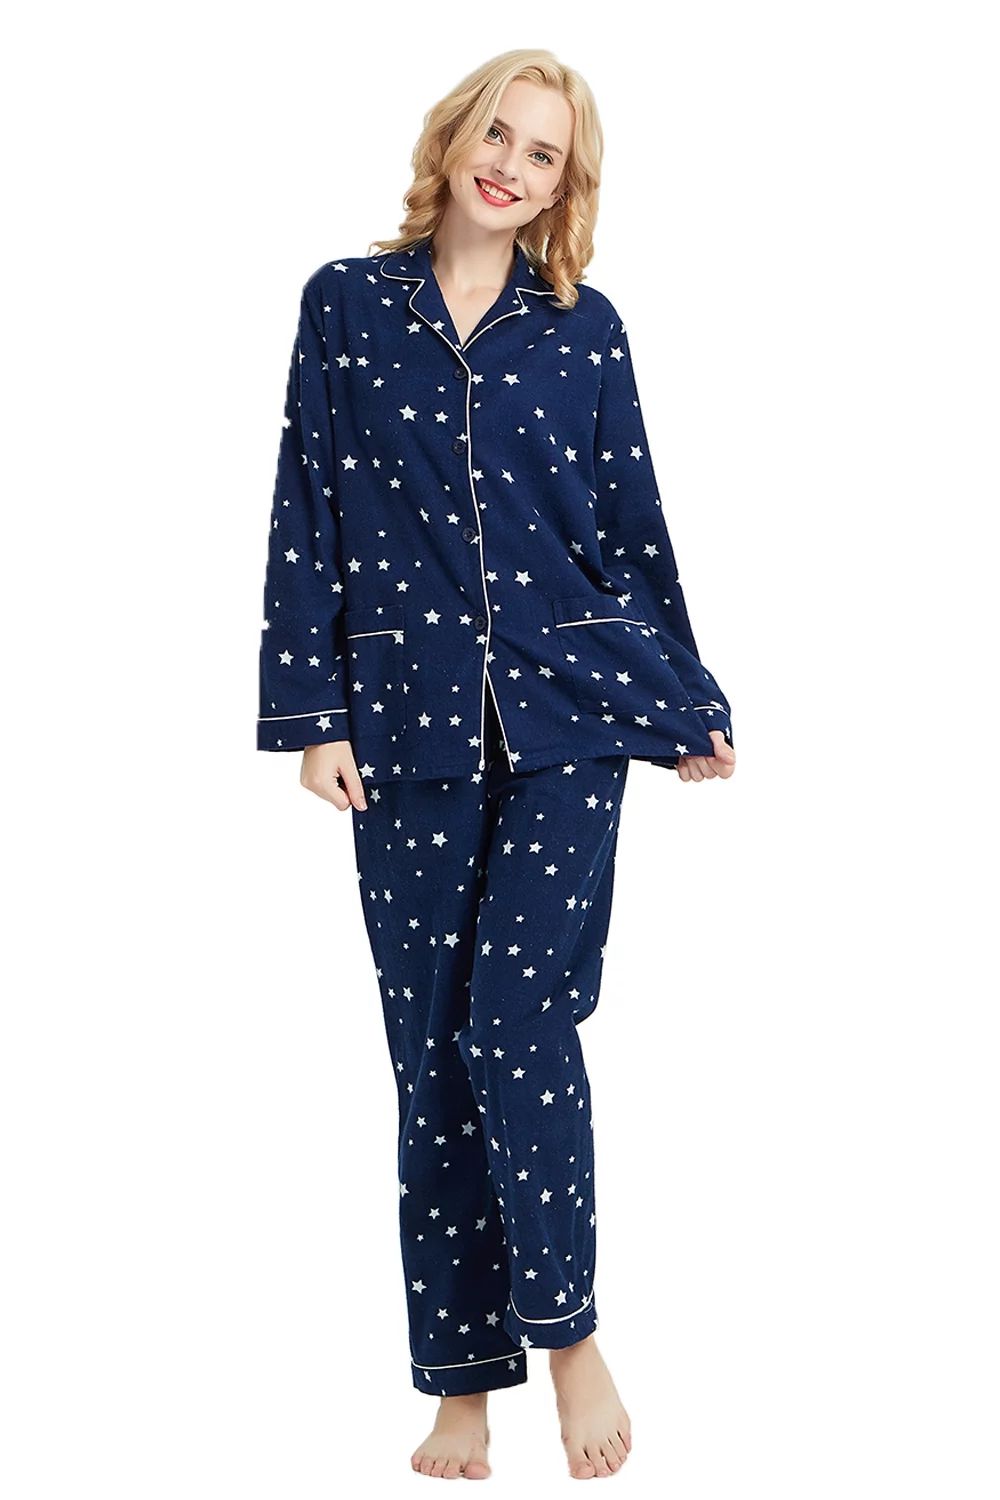 GLOBAL 100% Cotton Comfy Flannel Pajamas for Women 2-Piece Warm and Cozy Pj Set of Loungewear But... | Walmart (US)